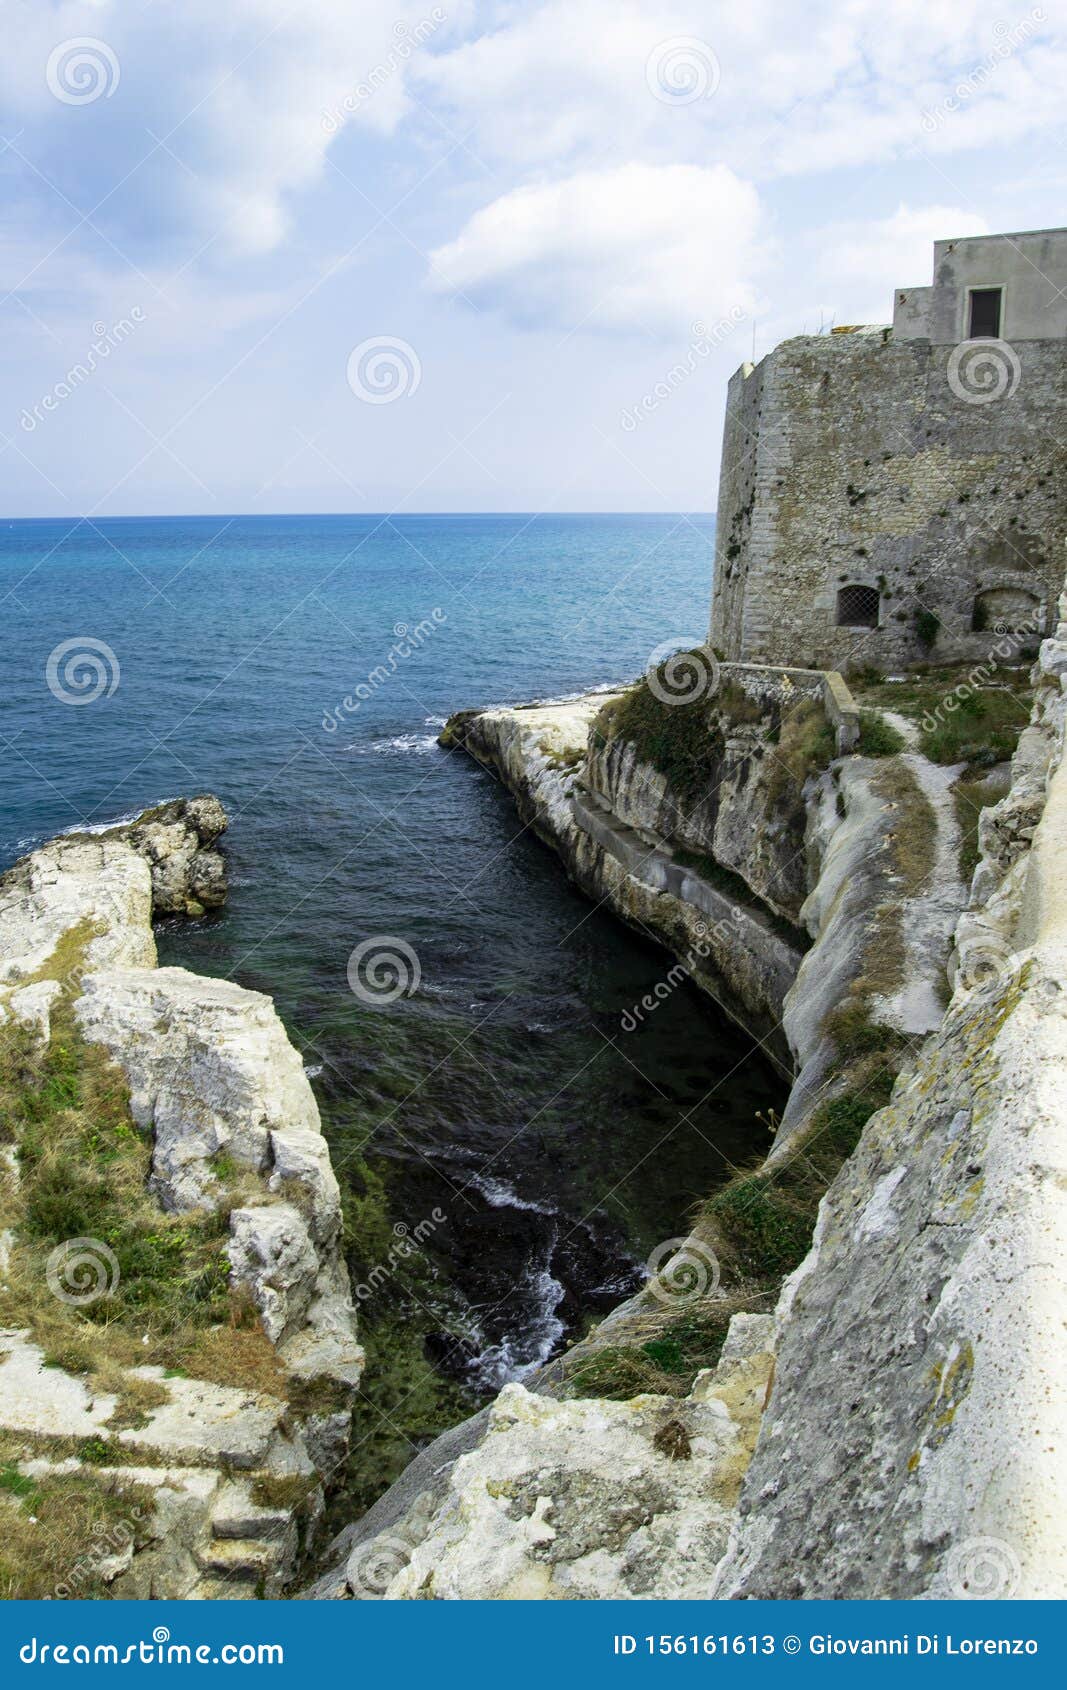 vieste, gargano, apulia, italy. panoramica view of the shores and cliffs with tourquise sea